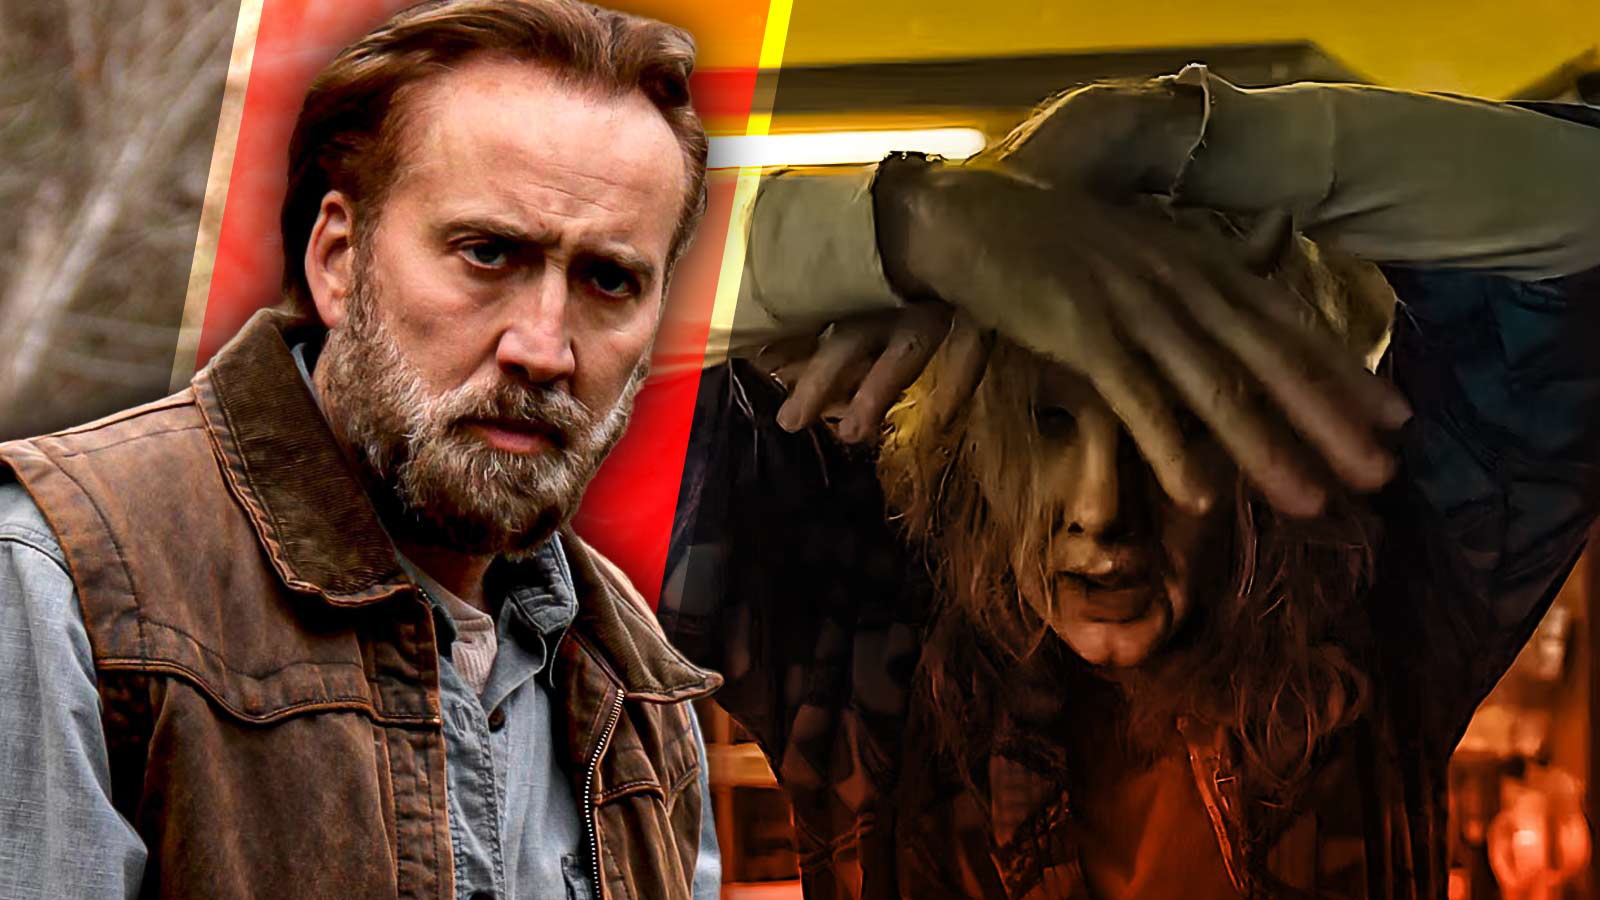 “The whiteness of the cold cream really spooked me”: Nicolas Cage Playing the Scariest Serial Killer After Hannibal Was Inspired by His Own Mother in Longlegs